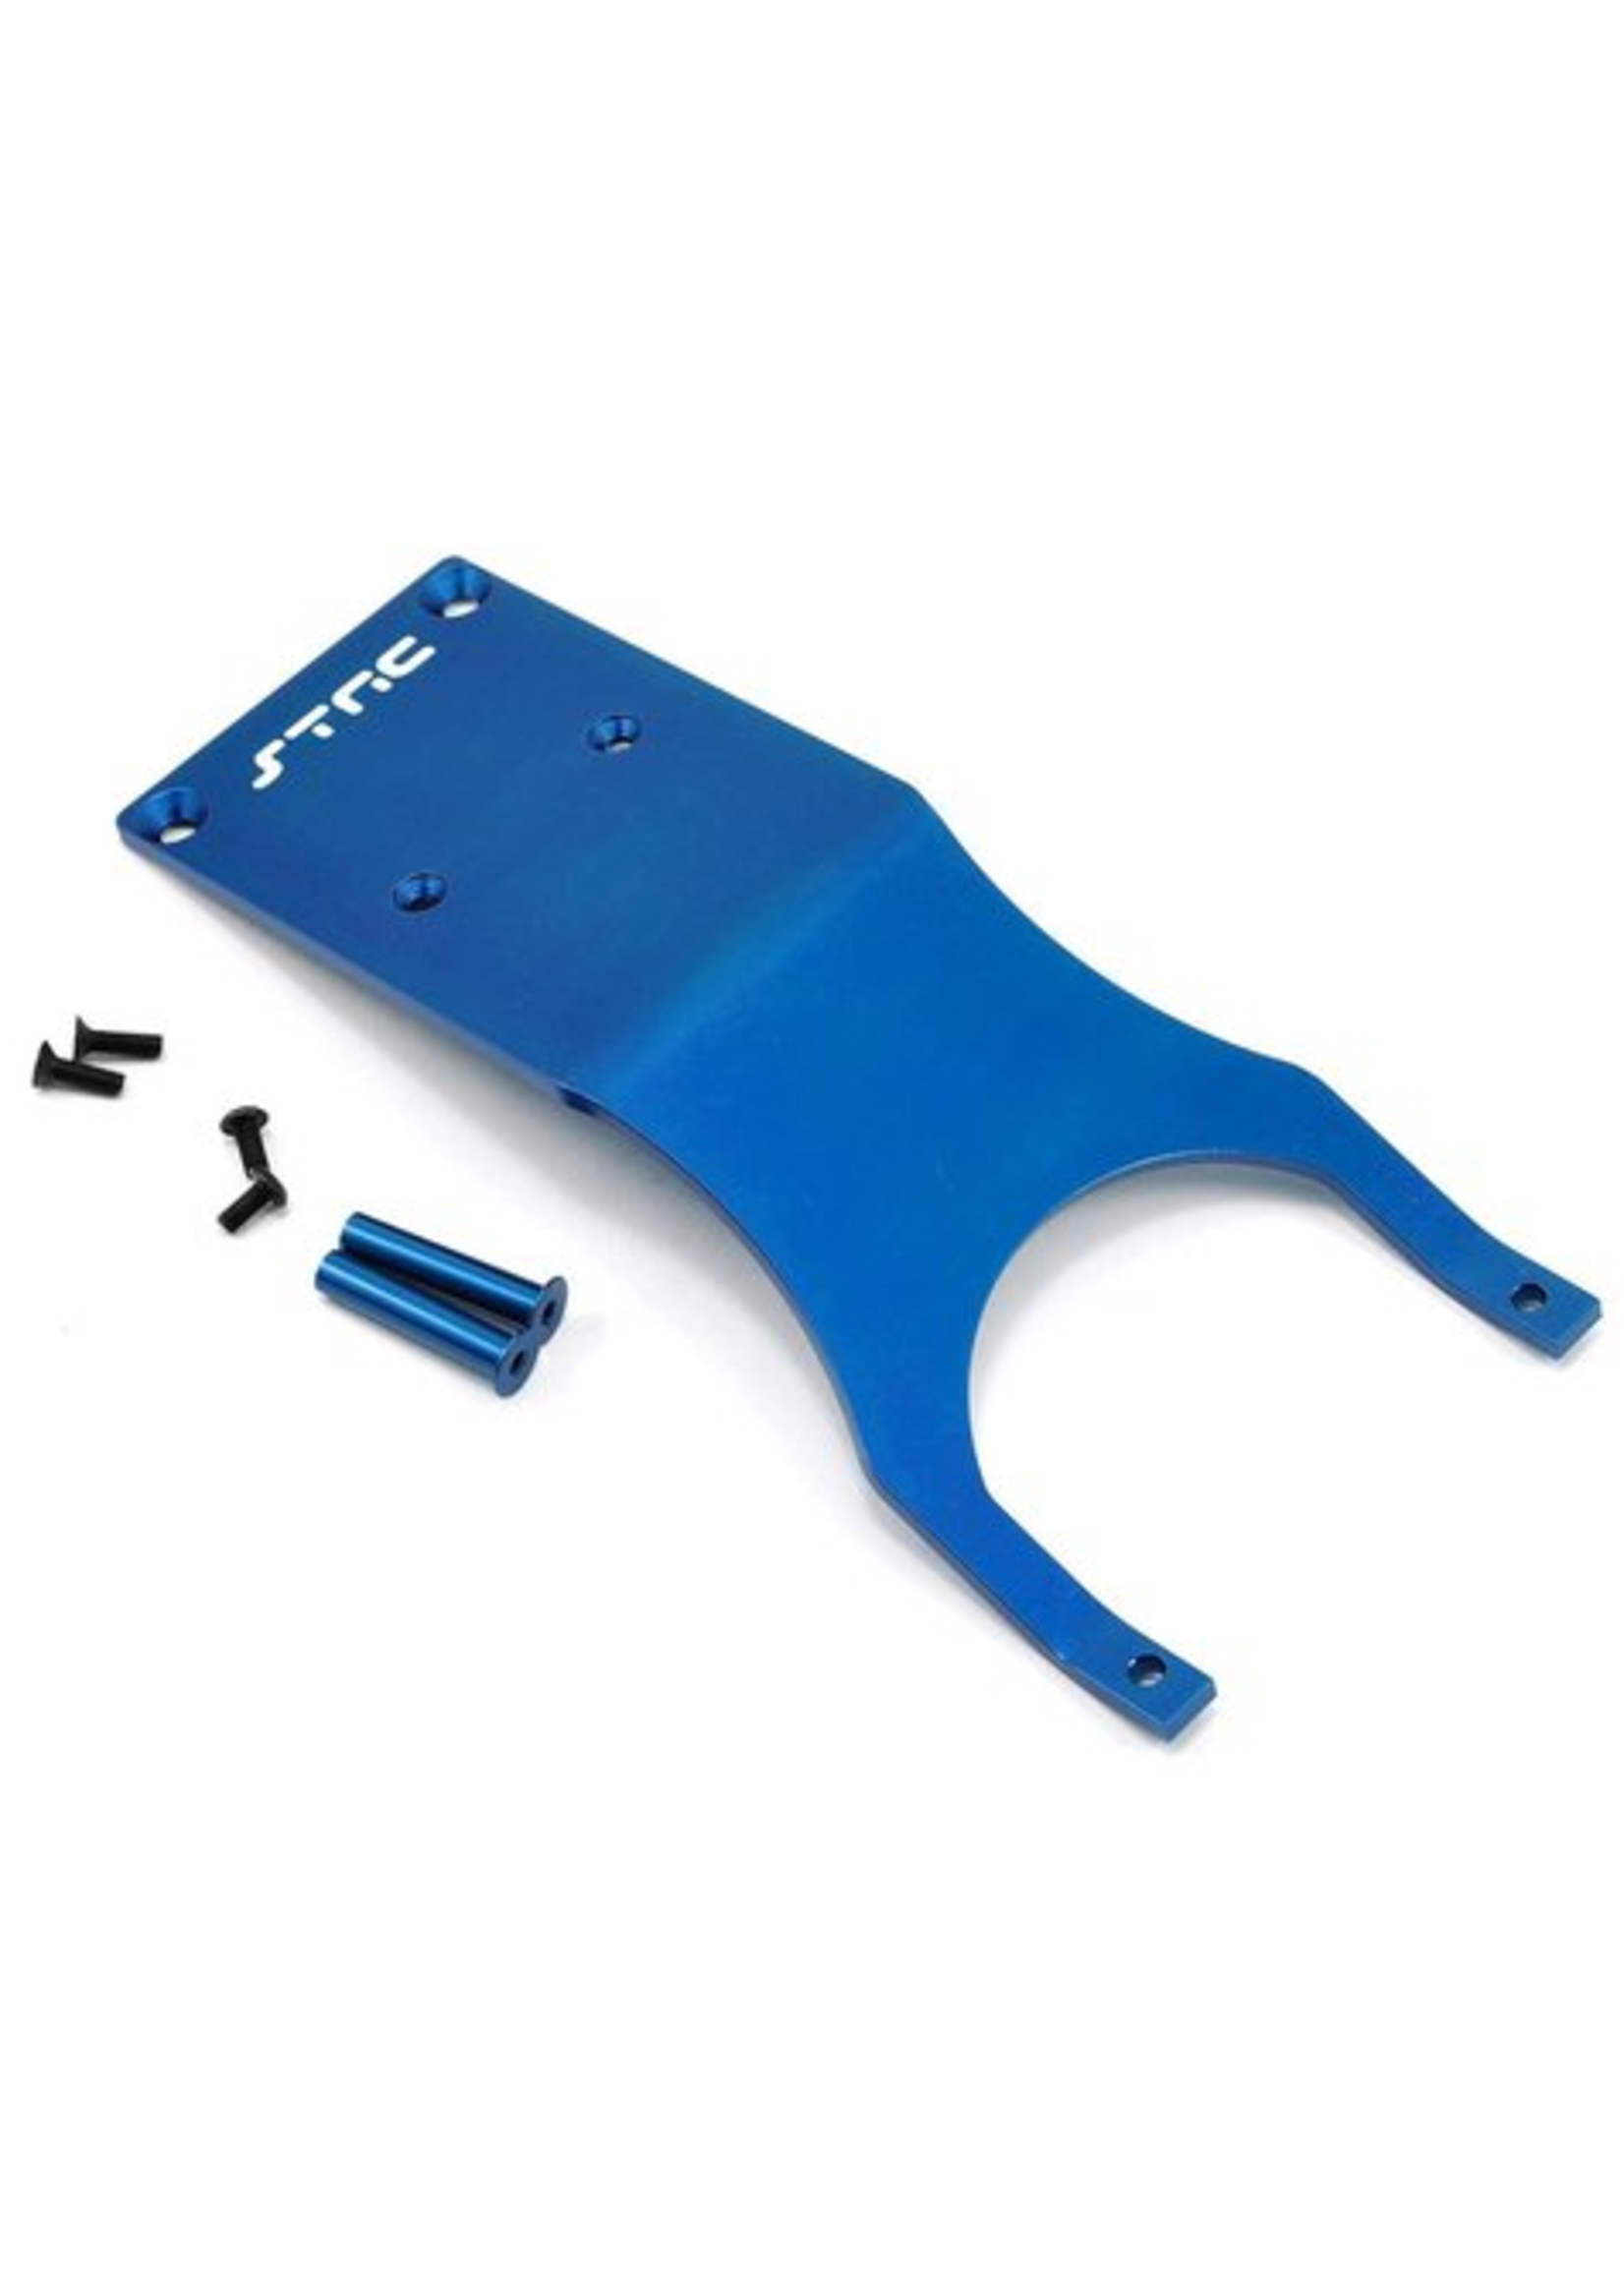 ST Racing Concepts SPTST5837B ST Racing Concepts CNC Machined Aluminum Front Skid Plate set (w/steering posts) for Traxxas Slash (Blue)